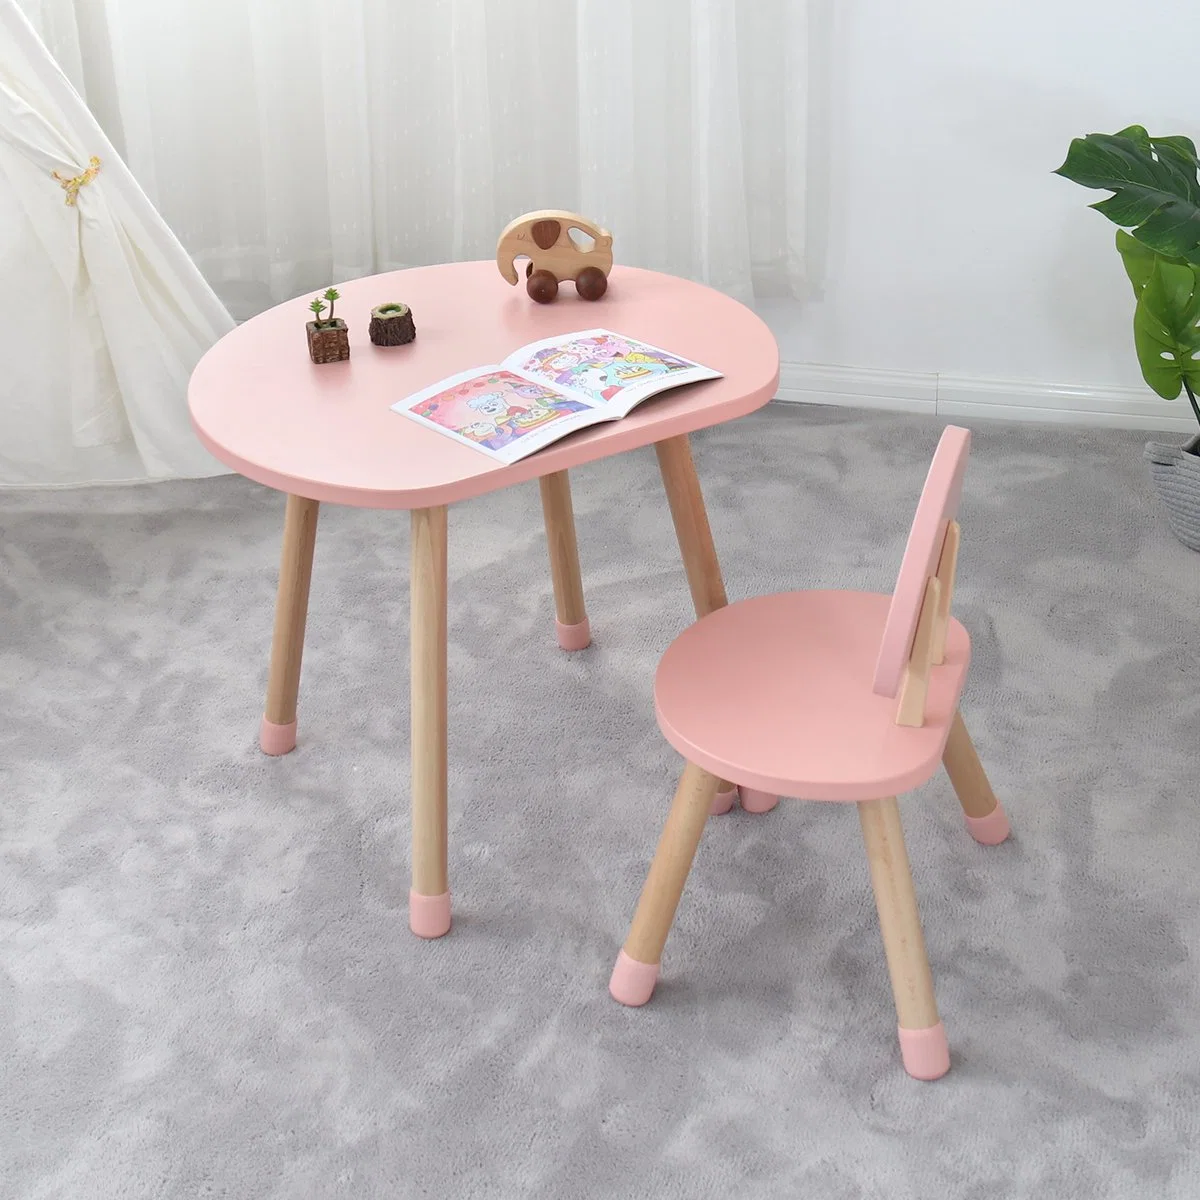 Ins Wooden Table and Chairs Preschool Kids Furniture Sets Reading Table and Chairs Set for Kids